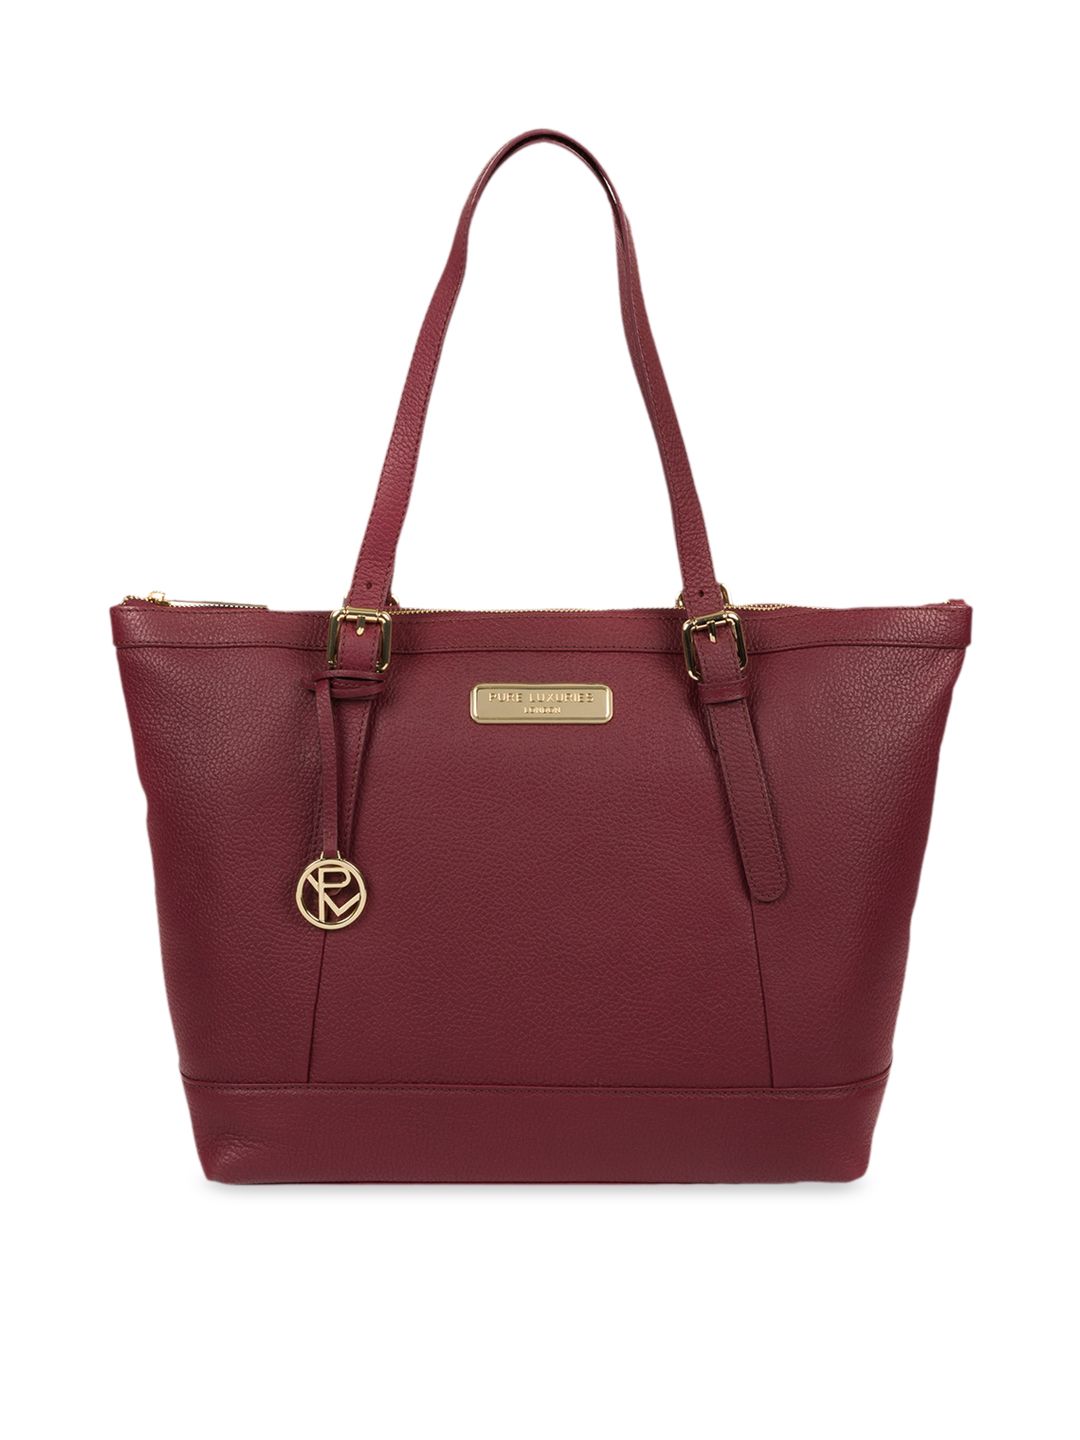 PURE LUXURIES LONDON Women Maroon Solid Genuine Leather Emily Tote Bag Price in India